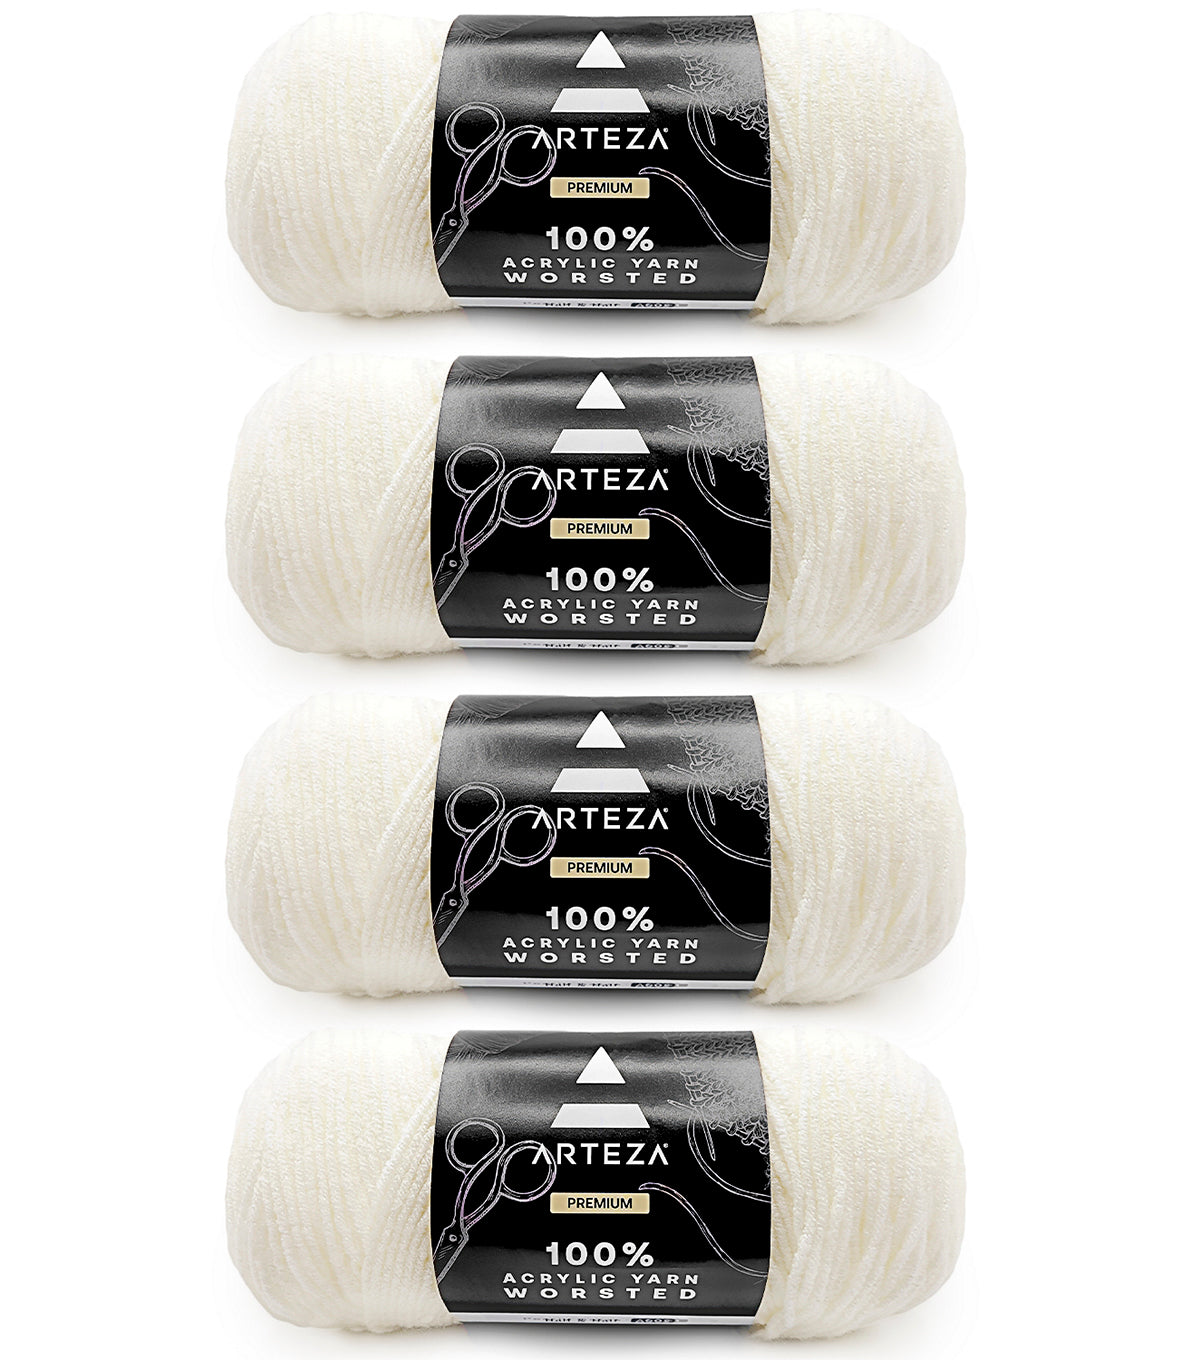  Arteza Acrylic Yarn for Crocheting, 4 x 200-g Skeins of  Worsted Yarn for Knitting, Ripped Jeans A505, Machine Washable, Knitting &  Crochet Supplies – Use with Knitting Needles and Crochet